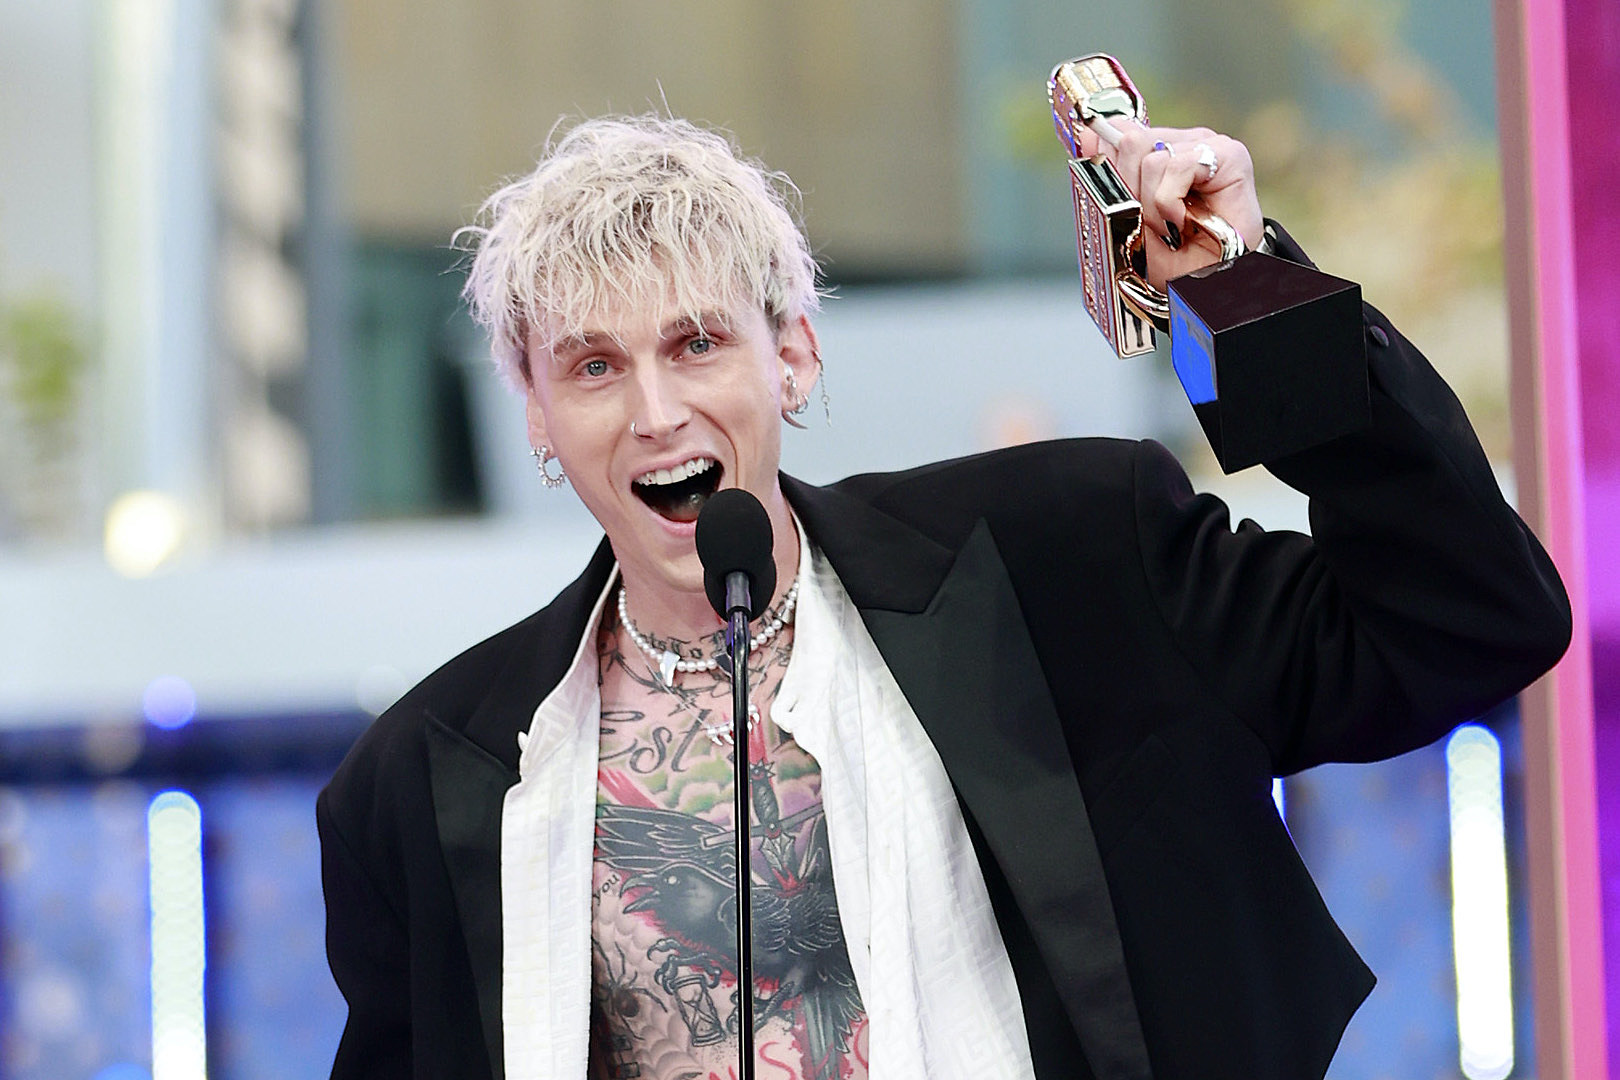 Machine Gun Kelly from Pop-Punk to 'PRESSURE' with rap track